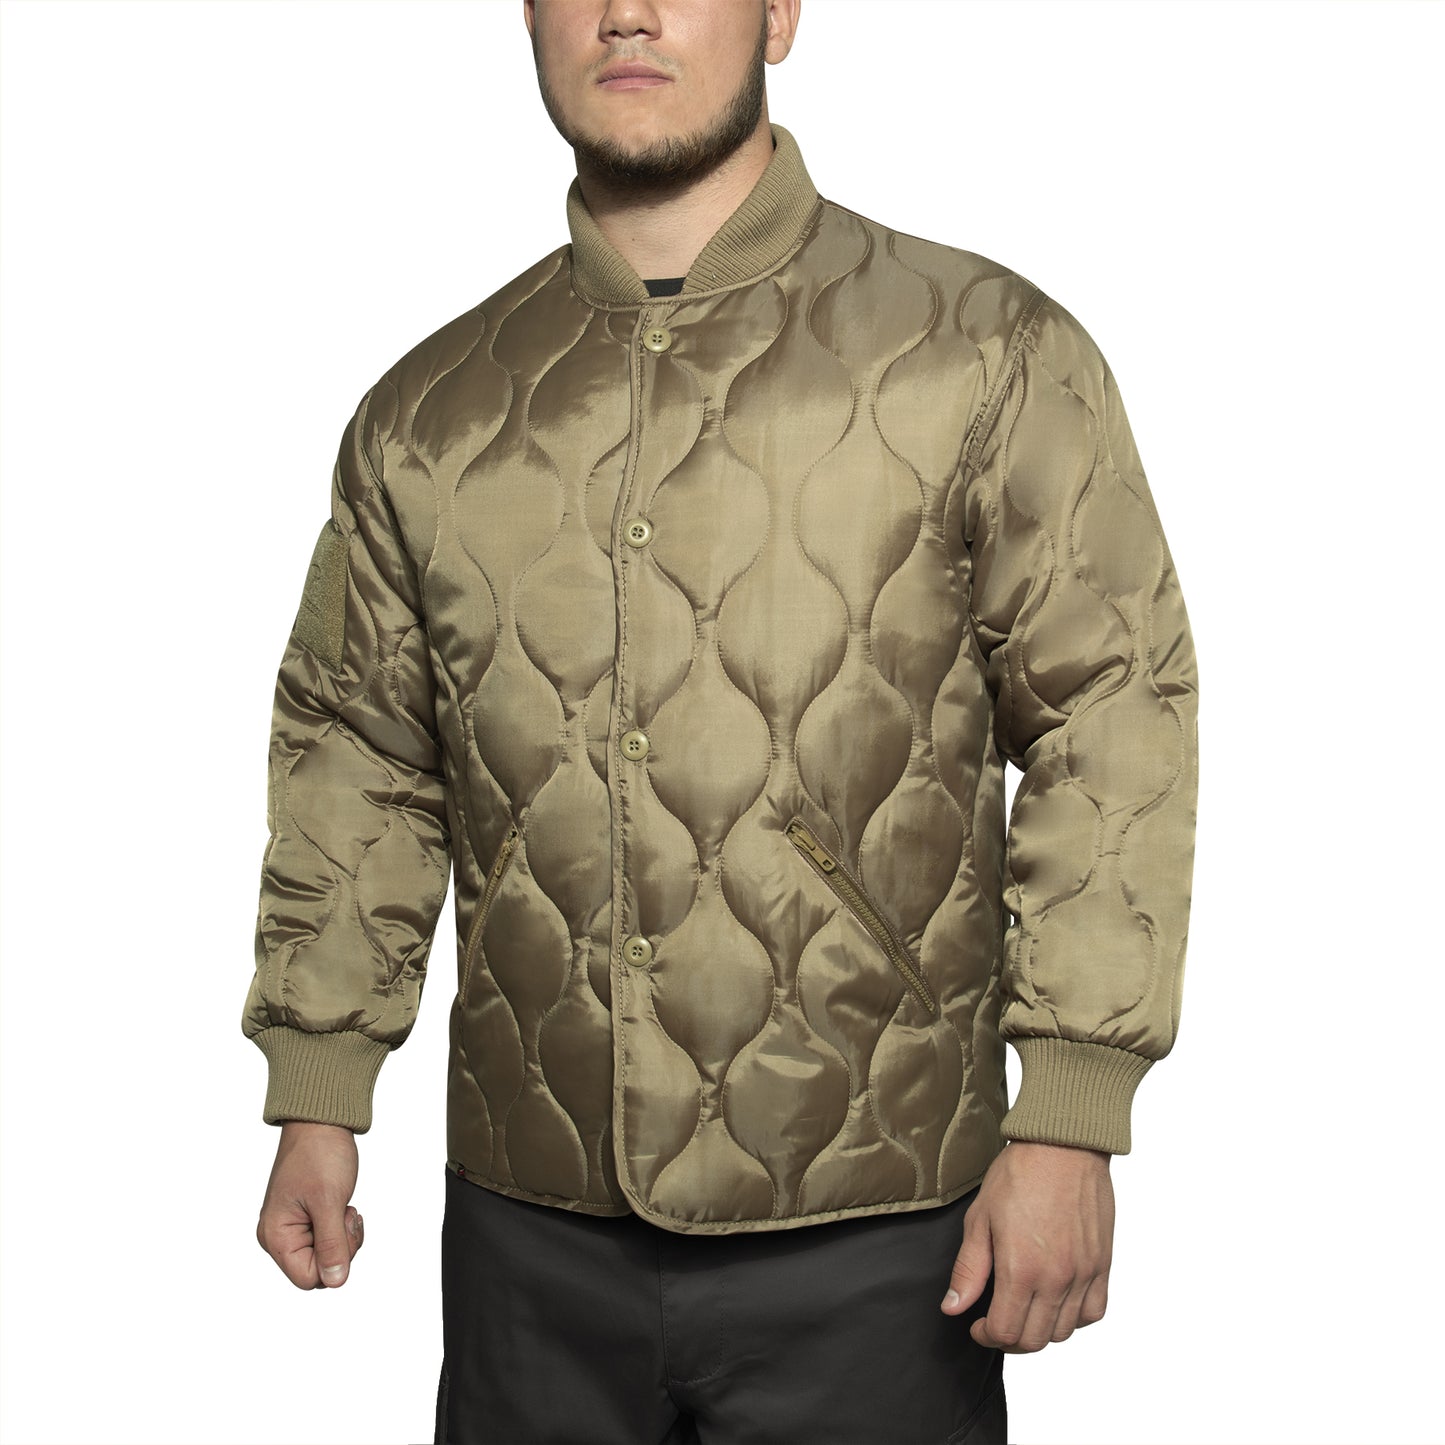 Men's Style Quilted Woobie Fashion Jacket